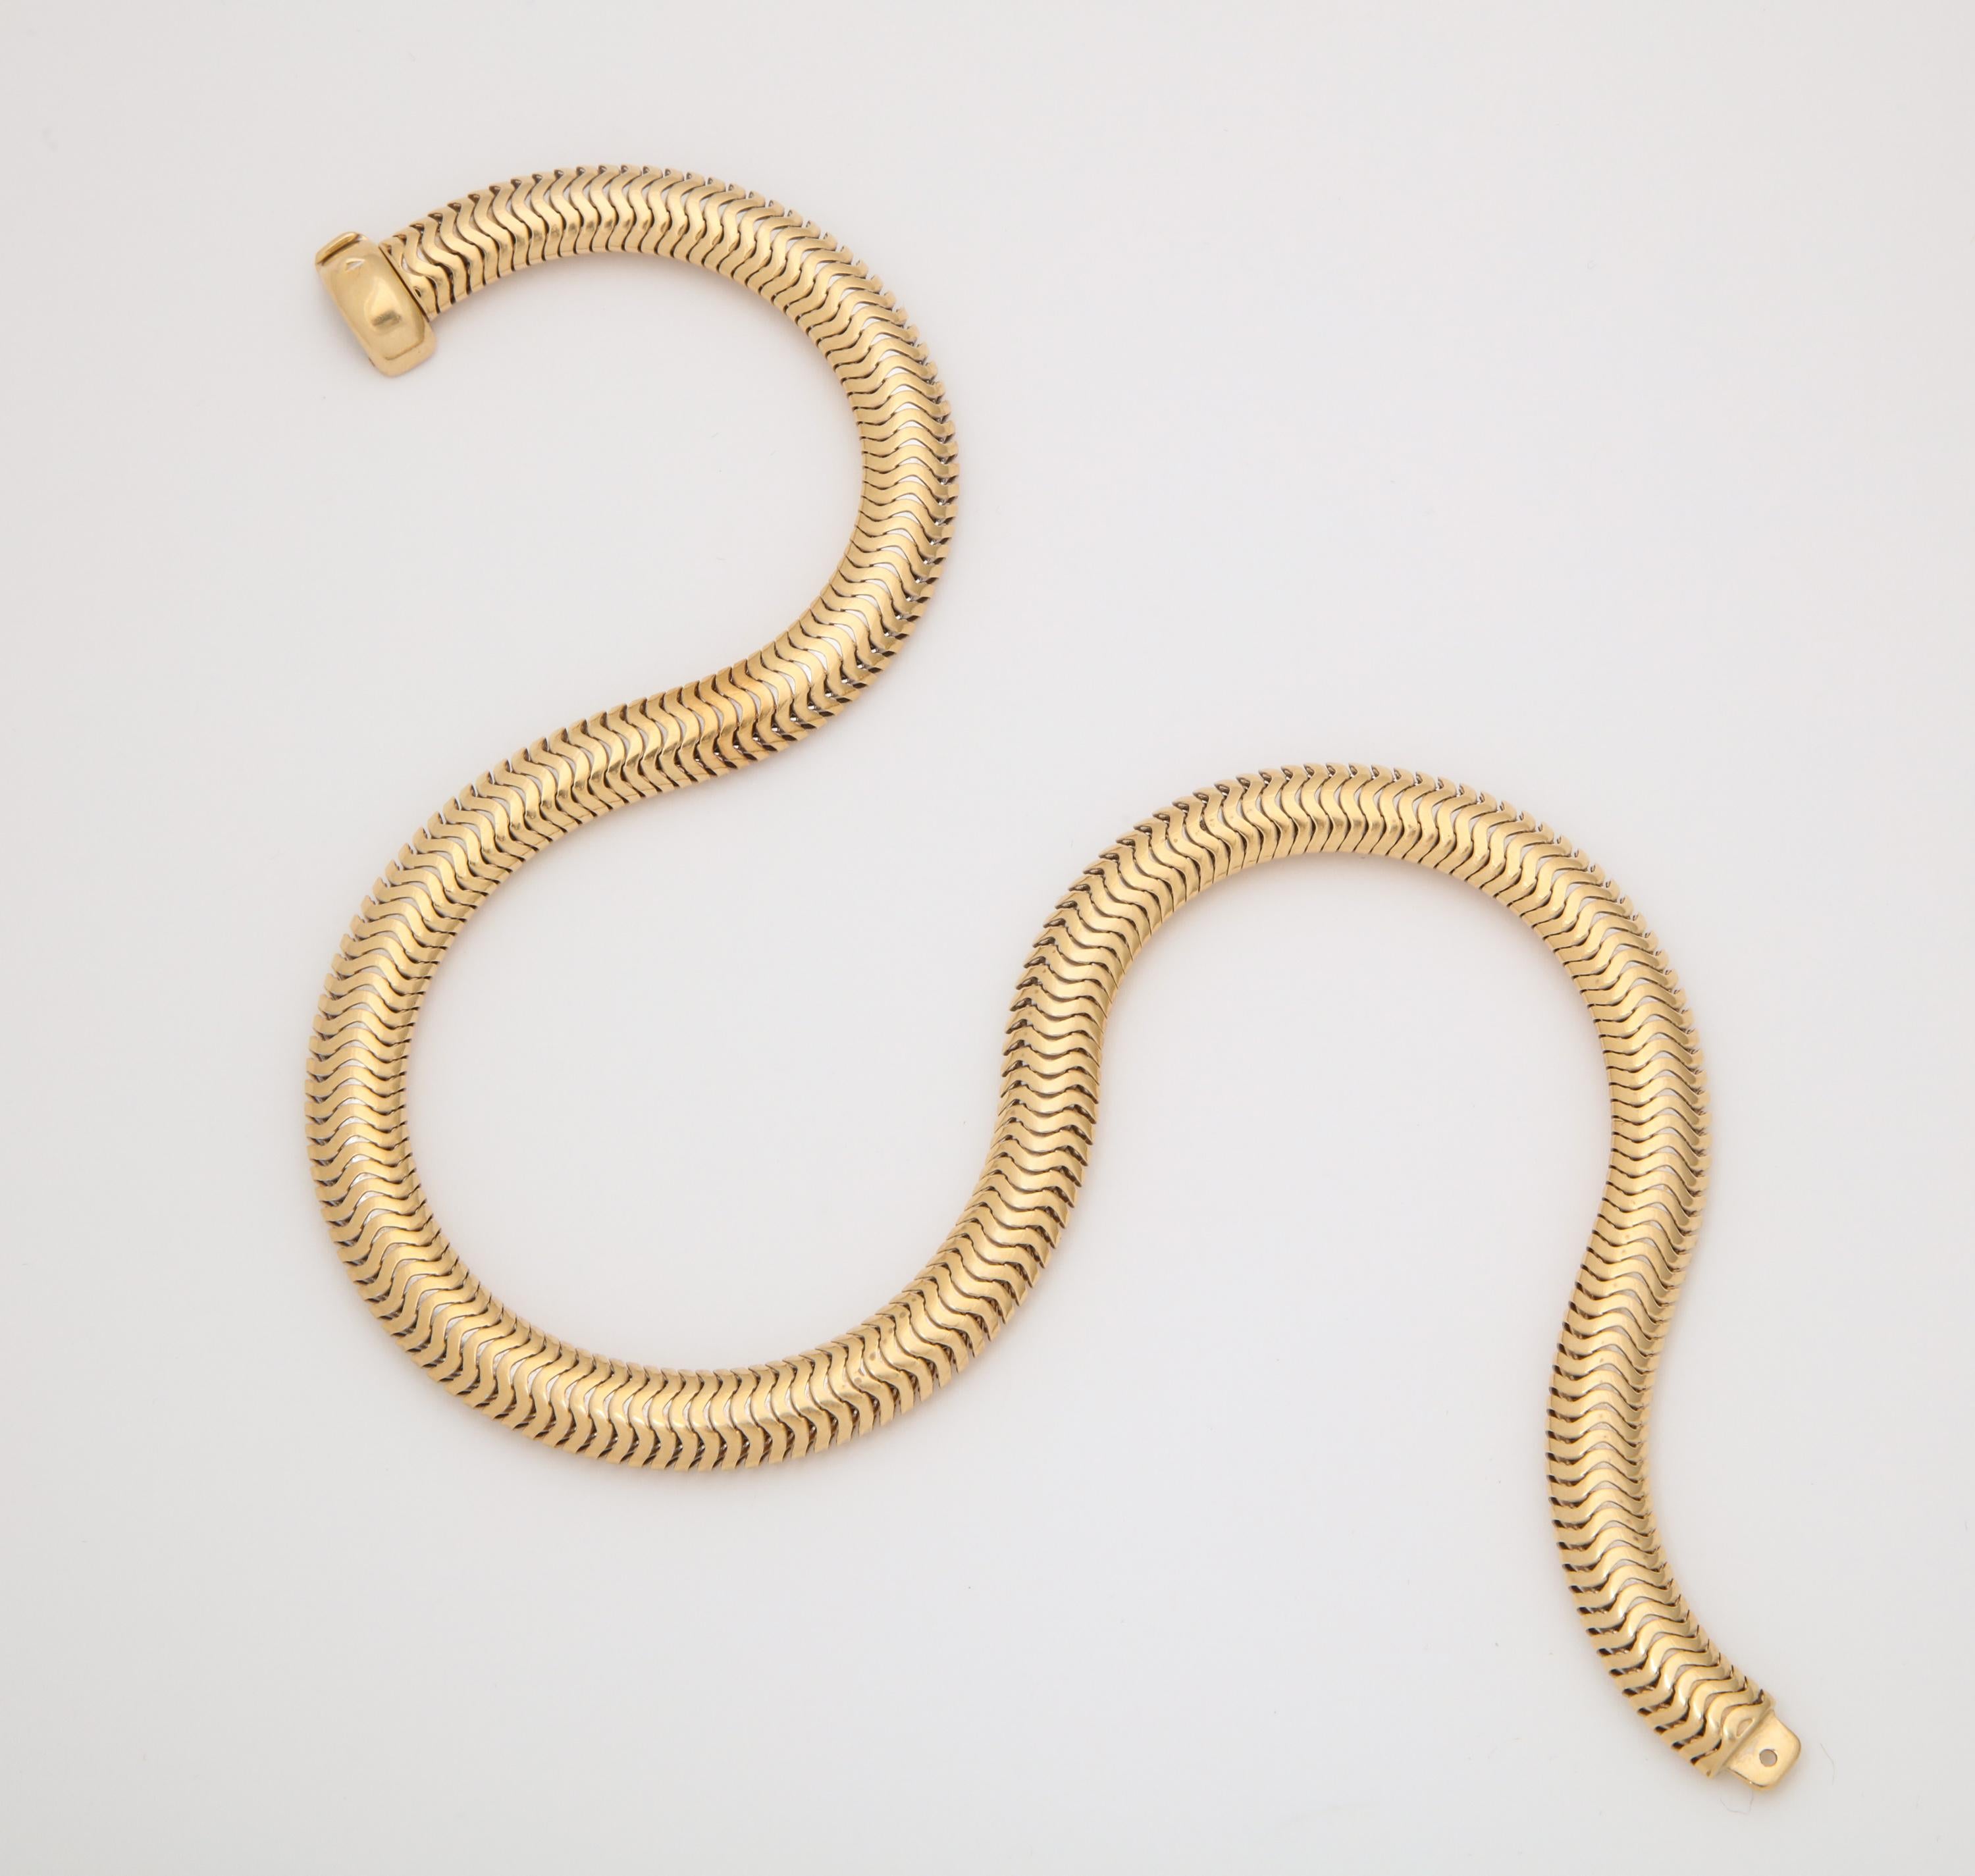 One 14kt Flexible Gold Snake Style Omega Link Necklace With 14kt Gold Lock Clasp Which May Be Worn In Front Or The In The Back.Circa 1940's Made In The United States Of America,Length 16.5 Inches.